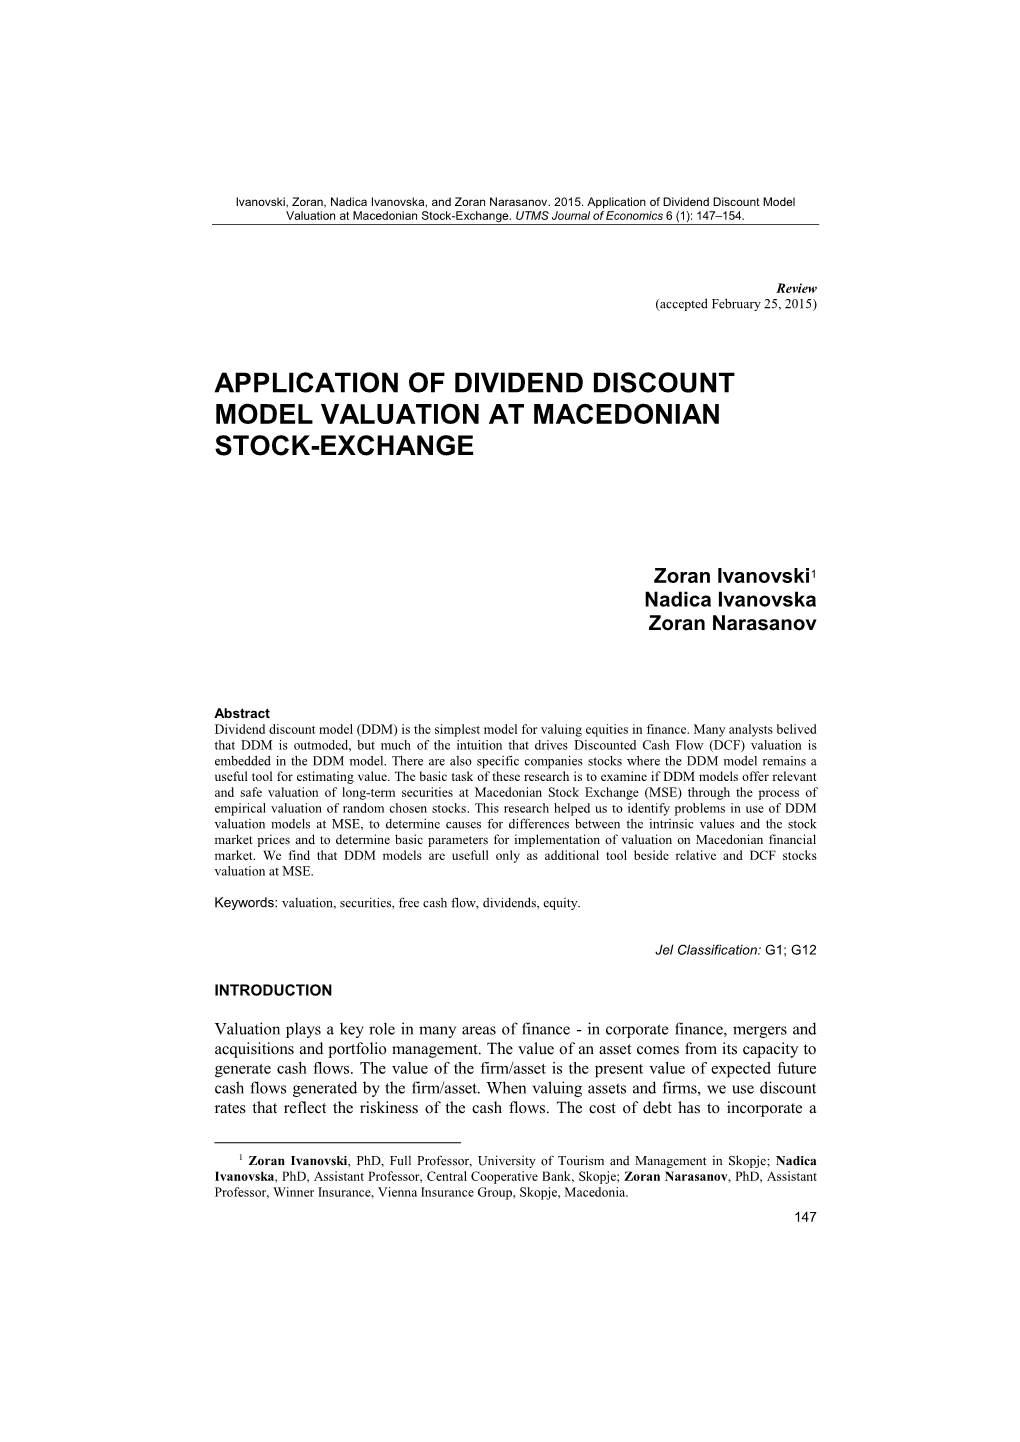 Application of Dividend Discount Model Valuation at Macedonian Stock-Exchange